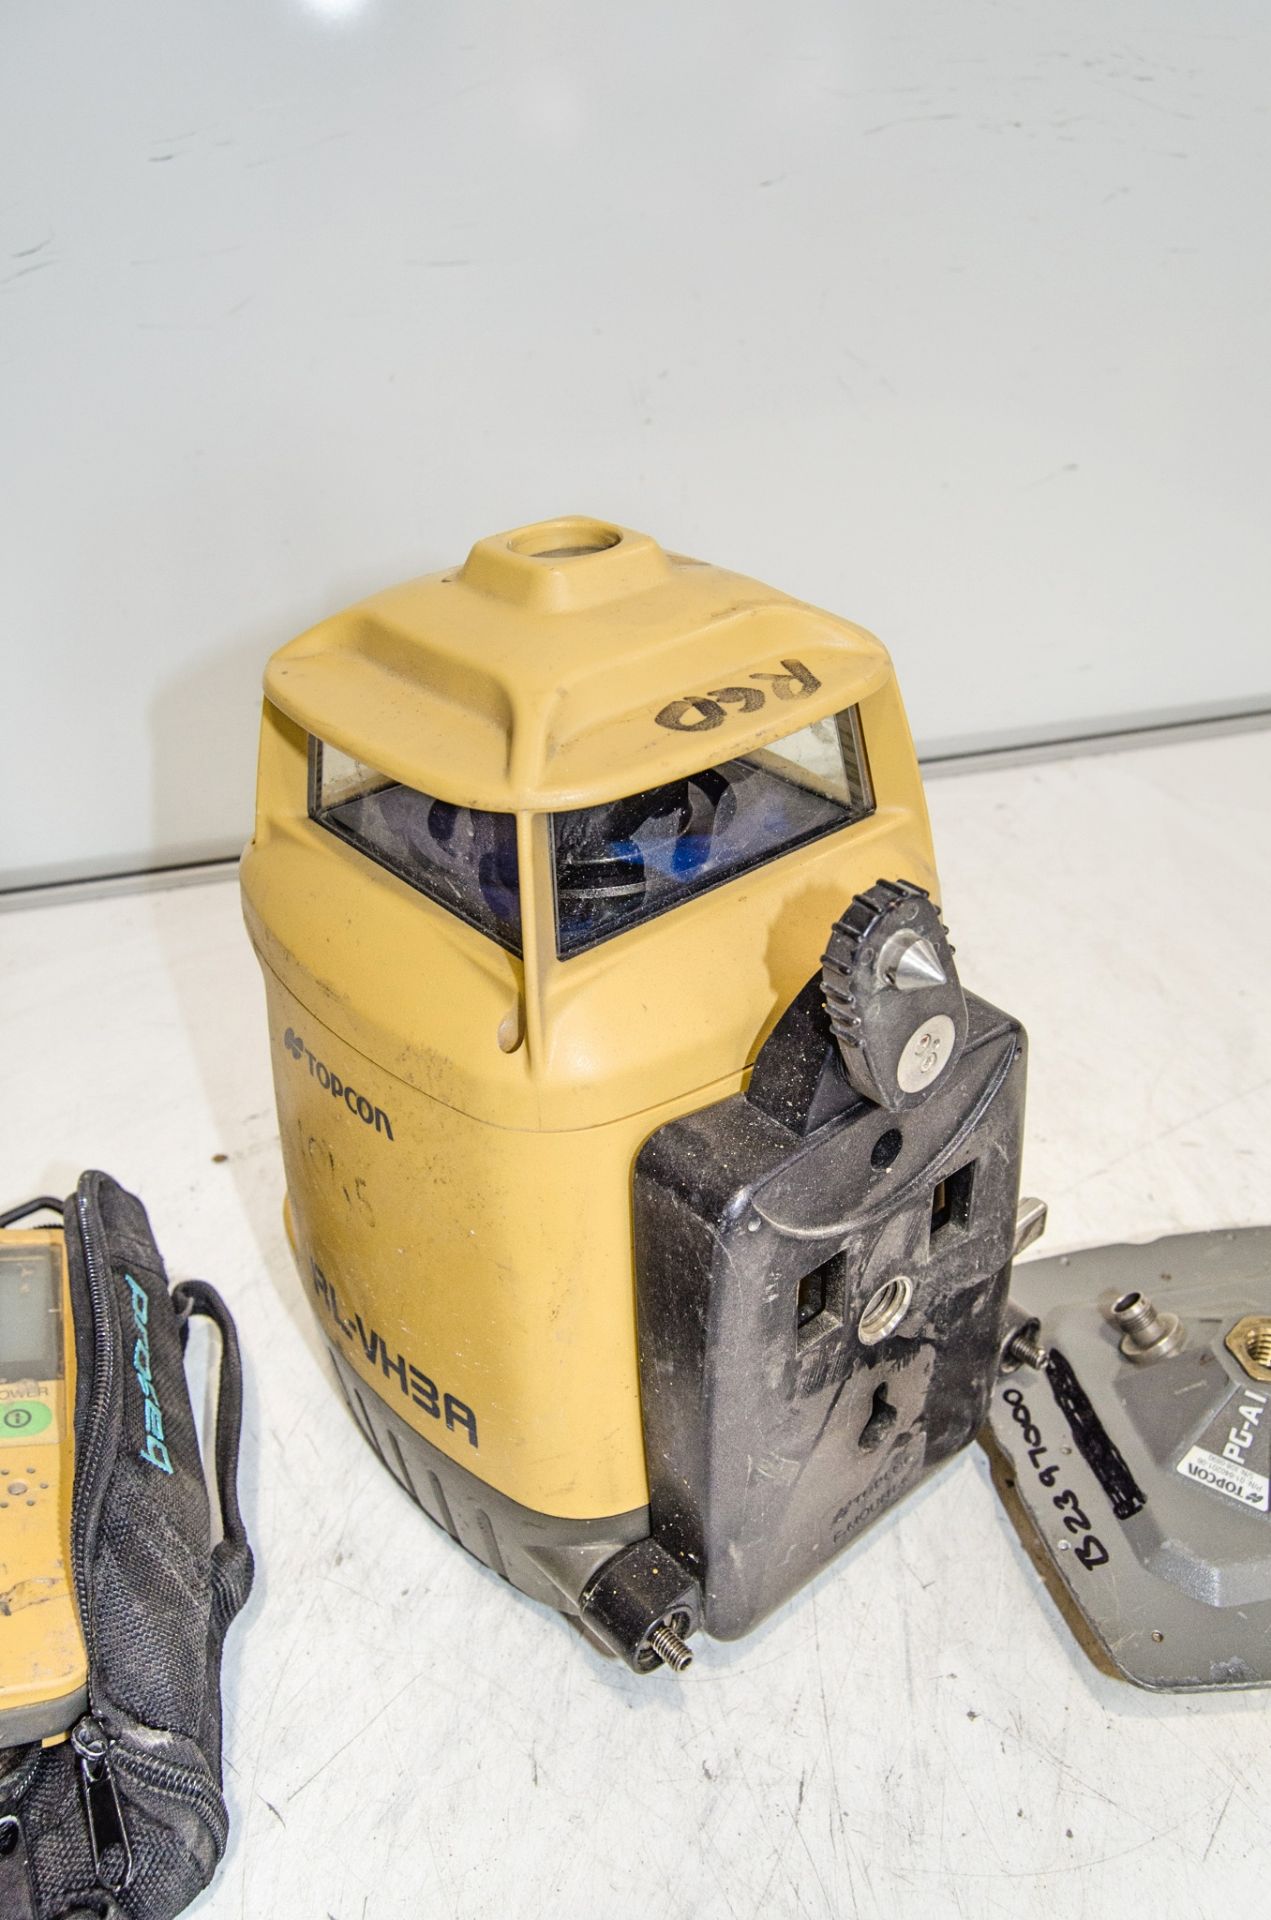 Topcon RLVH3A rotating laser level c/w LS70-C receiver and PG-A1 antenna ** No charger or battery ** - Image 2 of 2